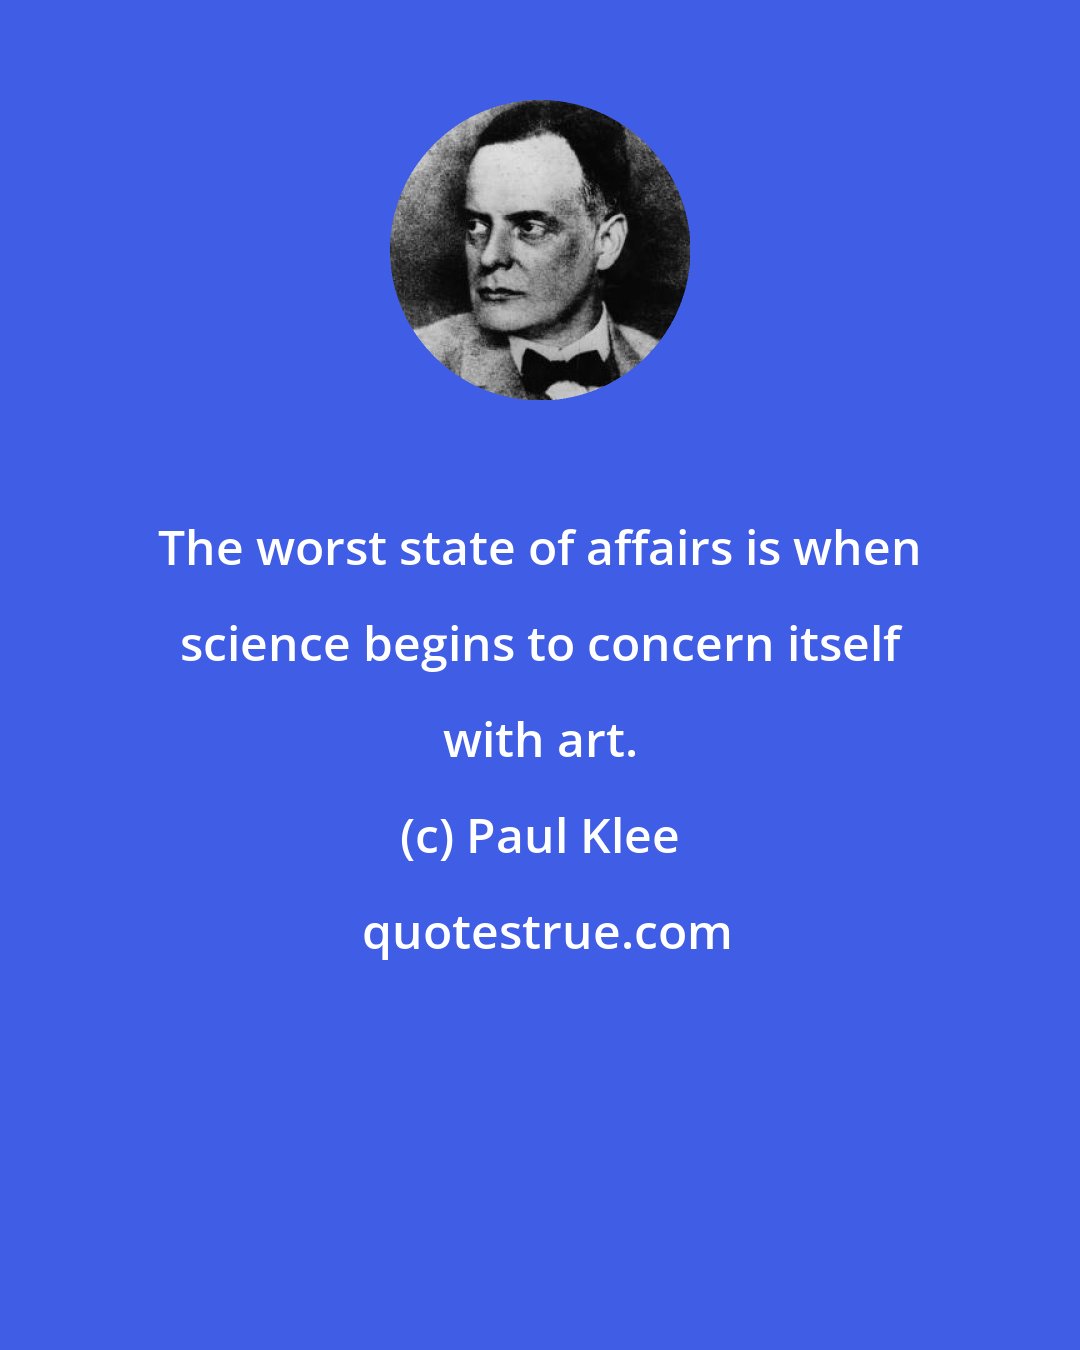 Paul Klee: The worst state of affairs is when science begins to concern itself with art.